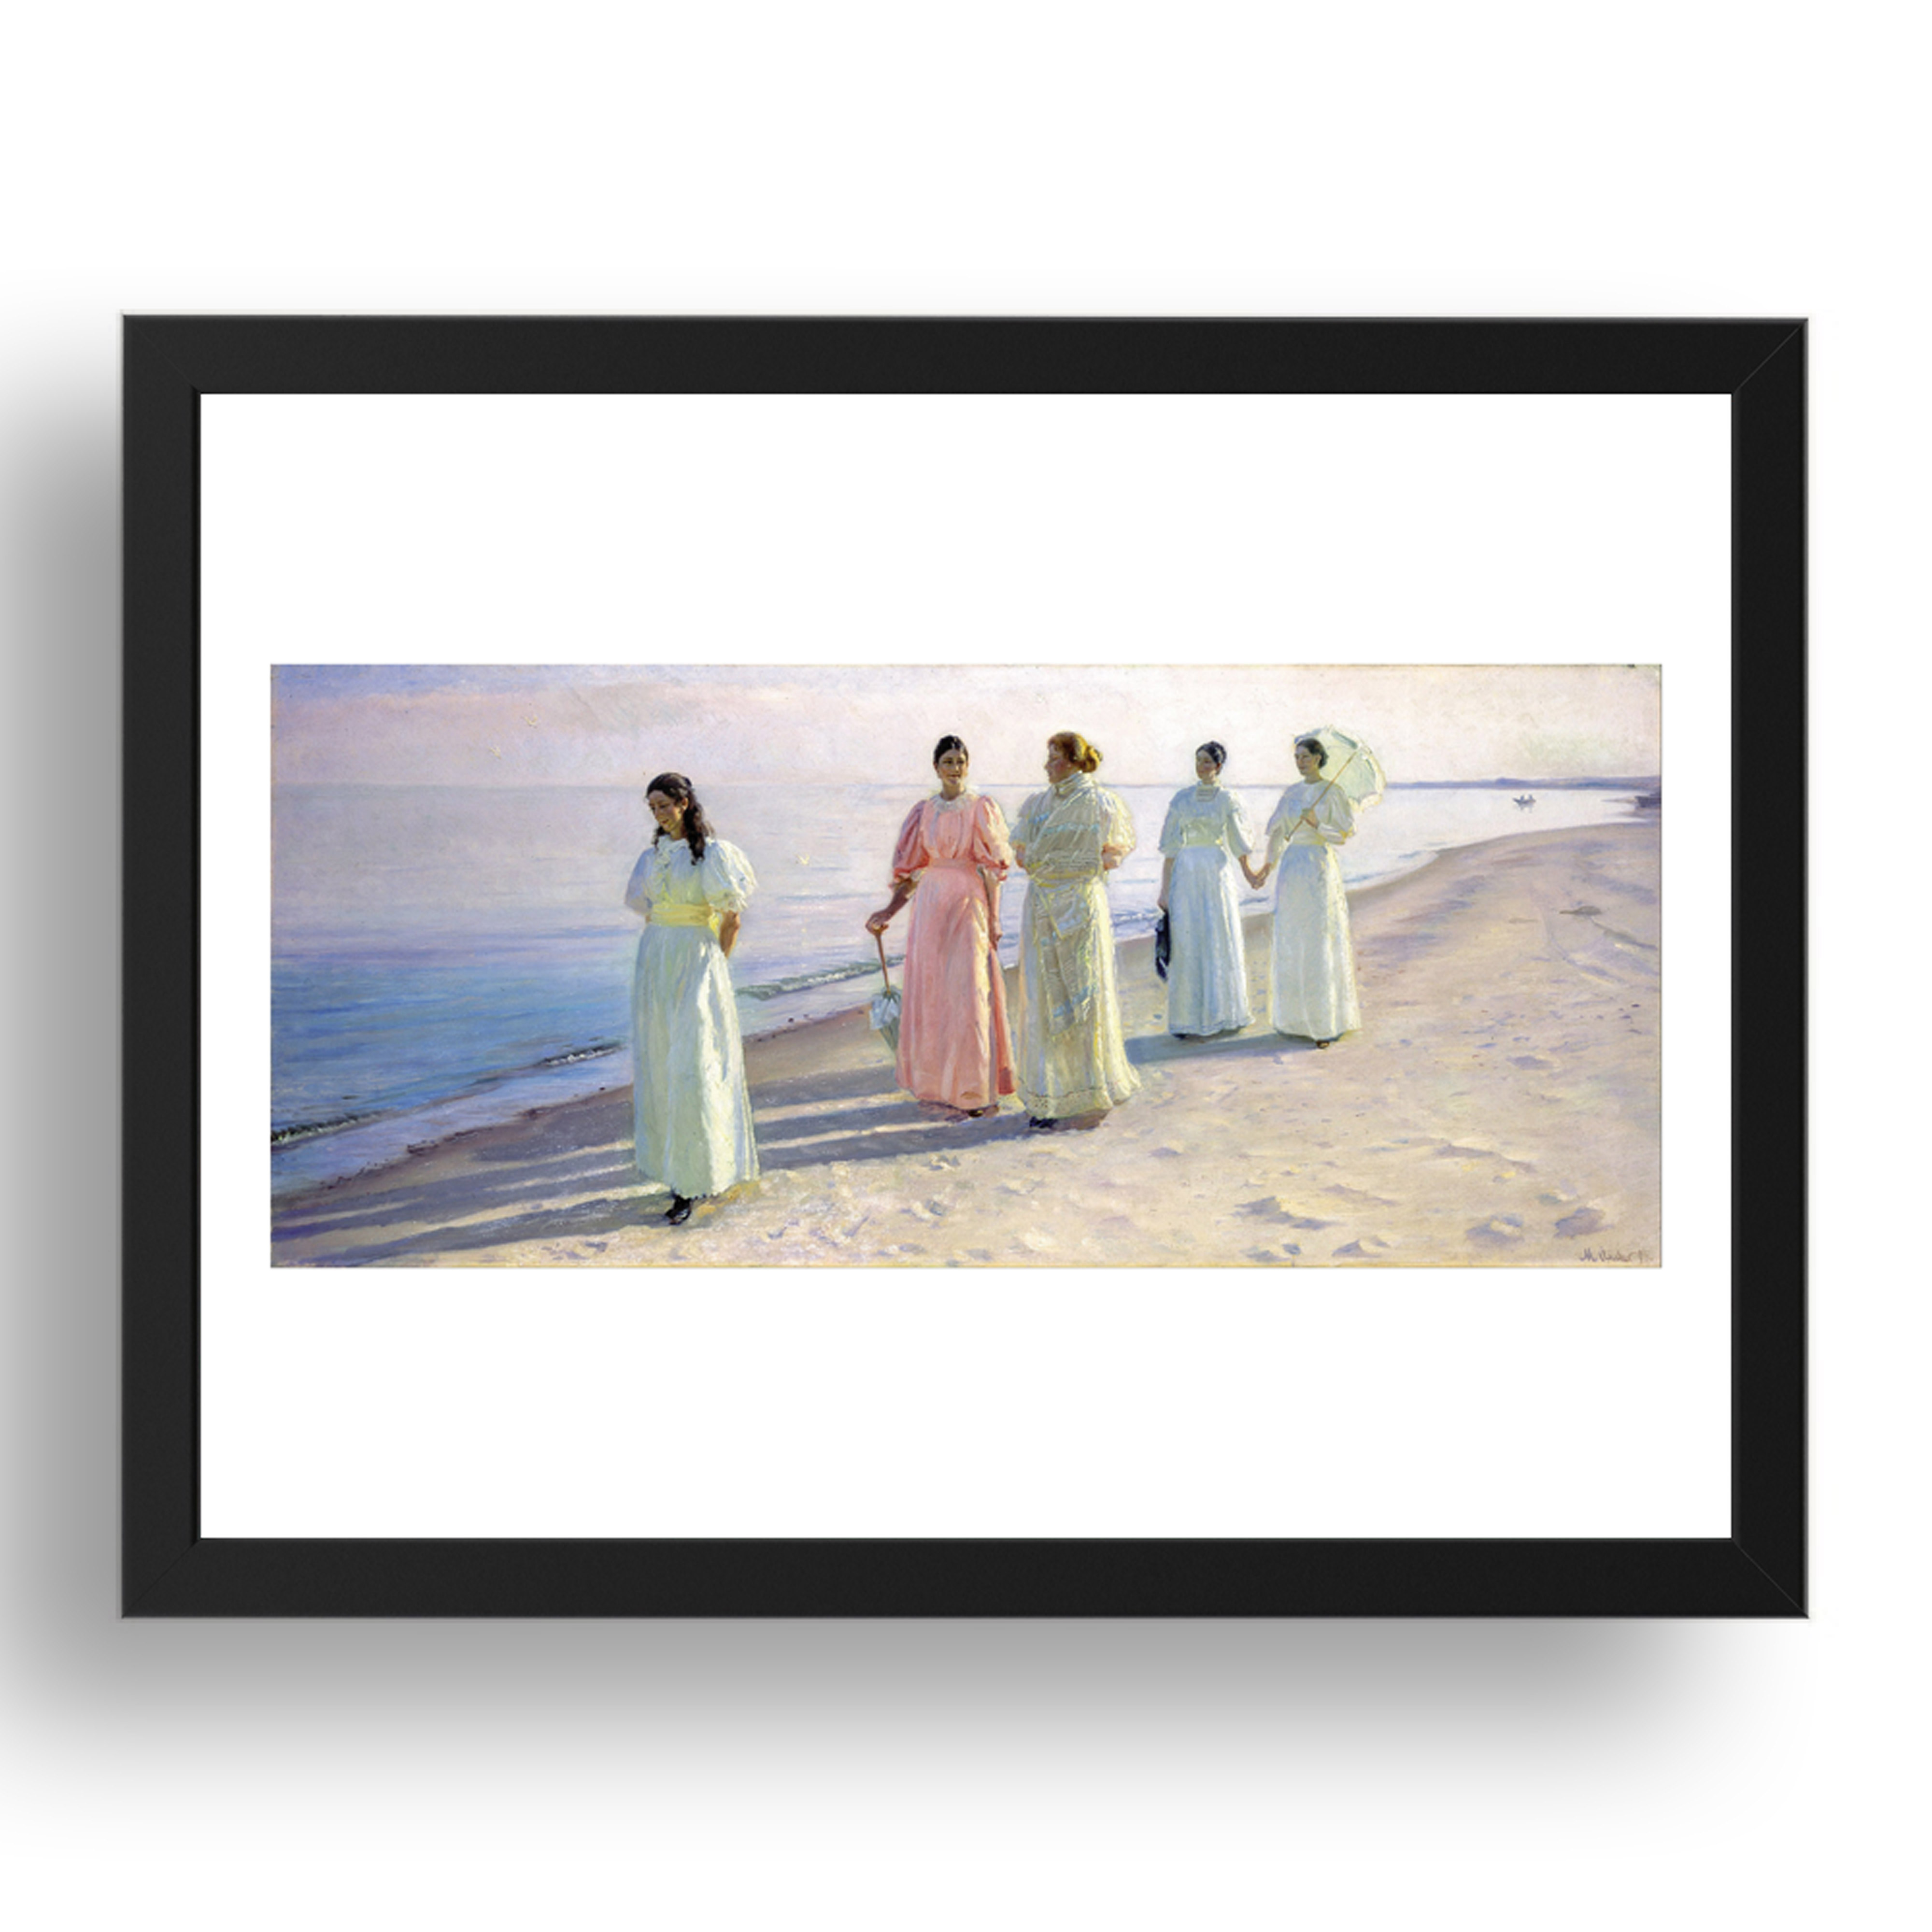 Michael Ancher - A Stroll On The Beach [1896], A3 (17x13") Black Frame - Picture 1 of 1